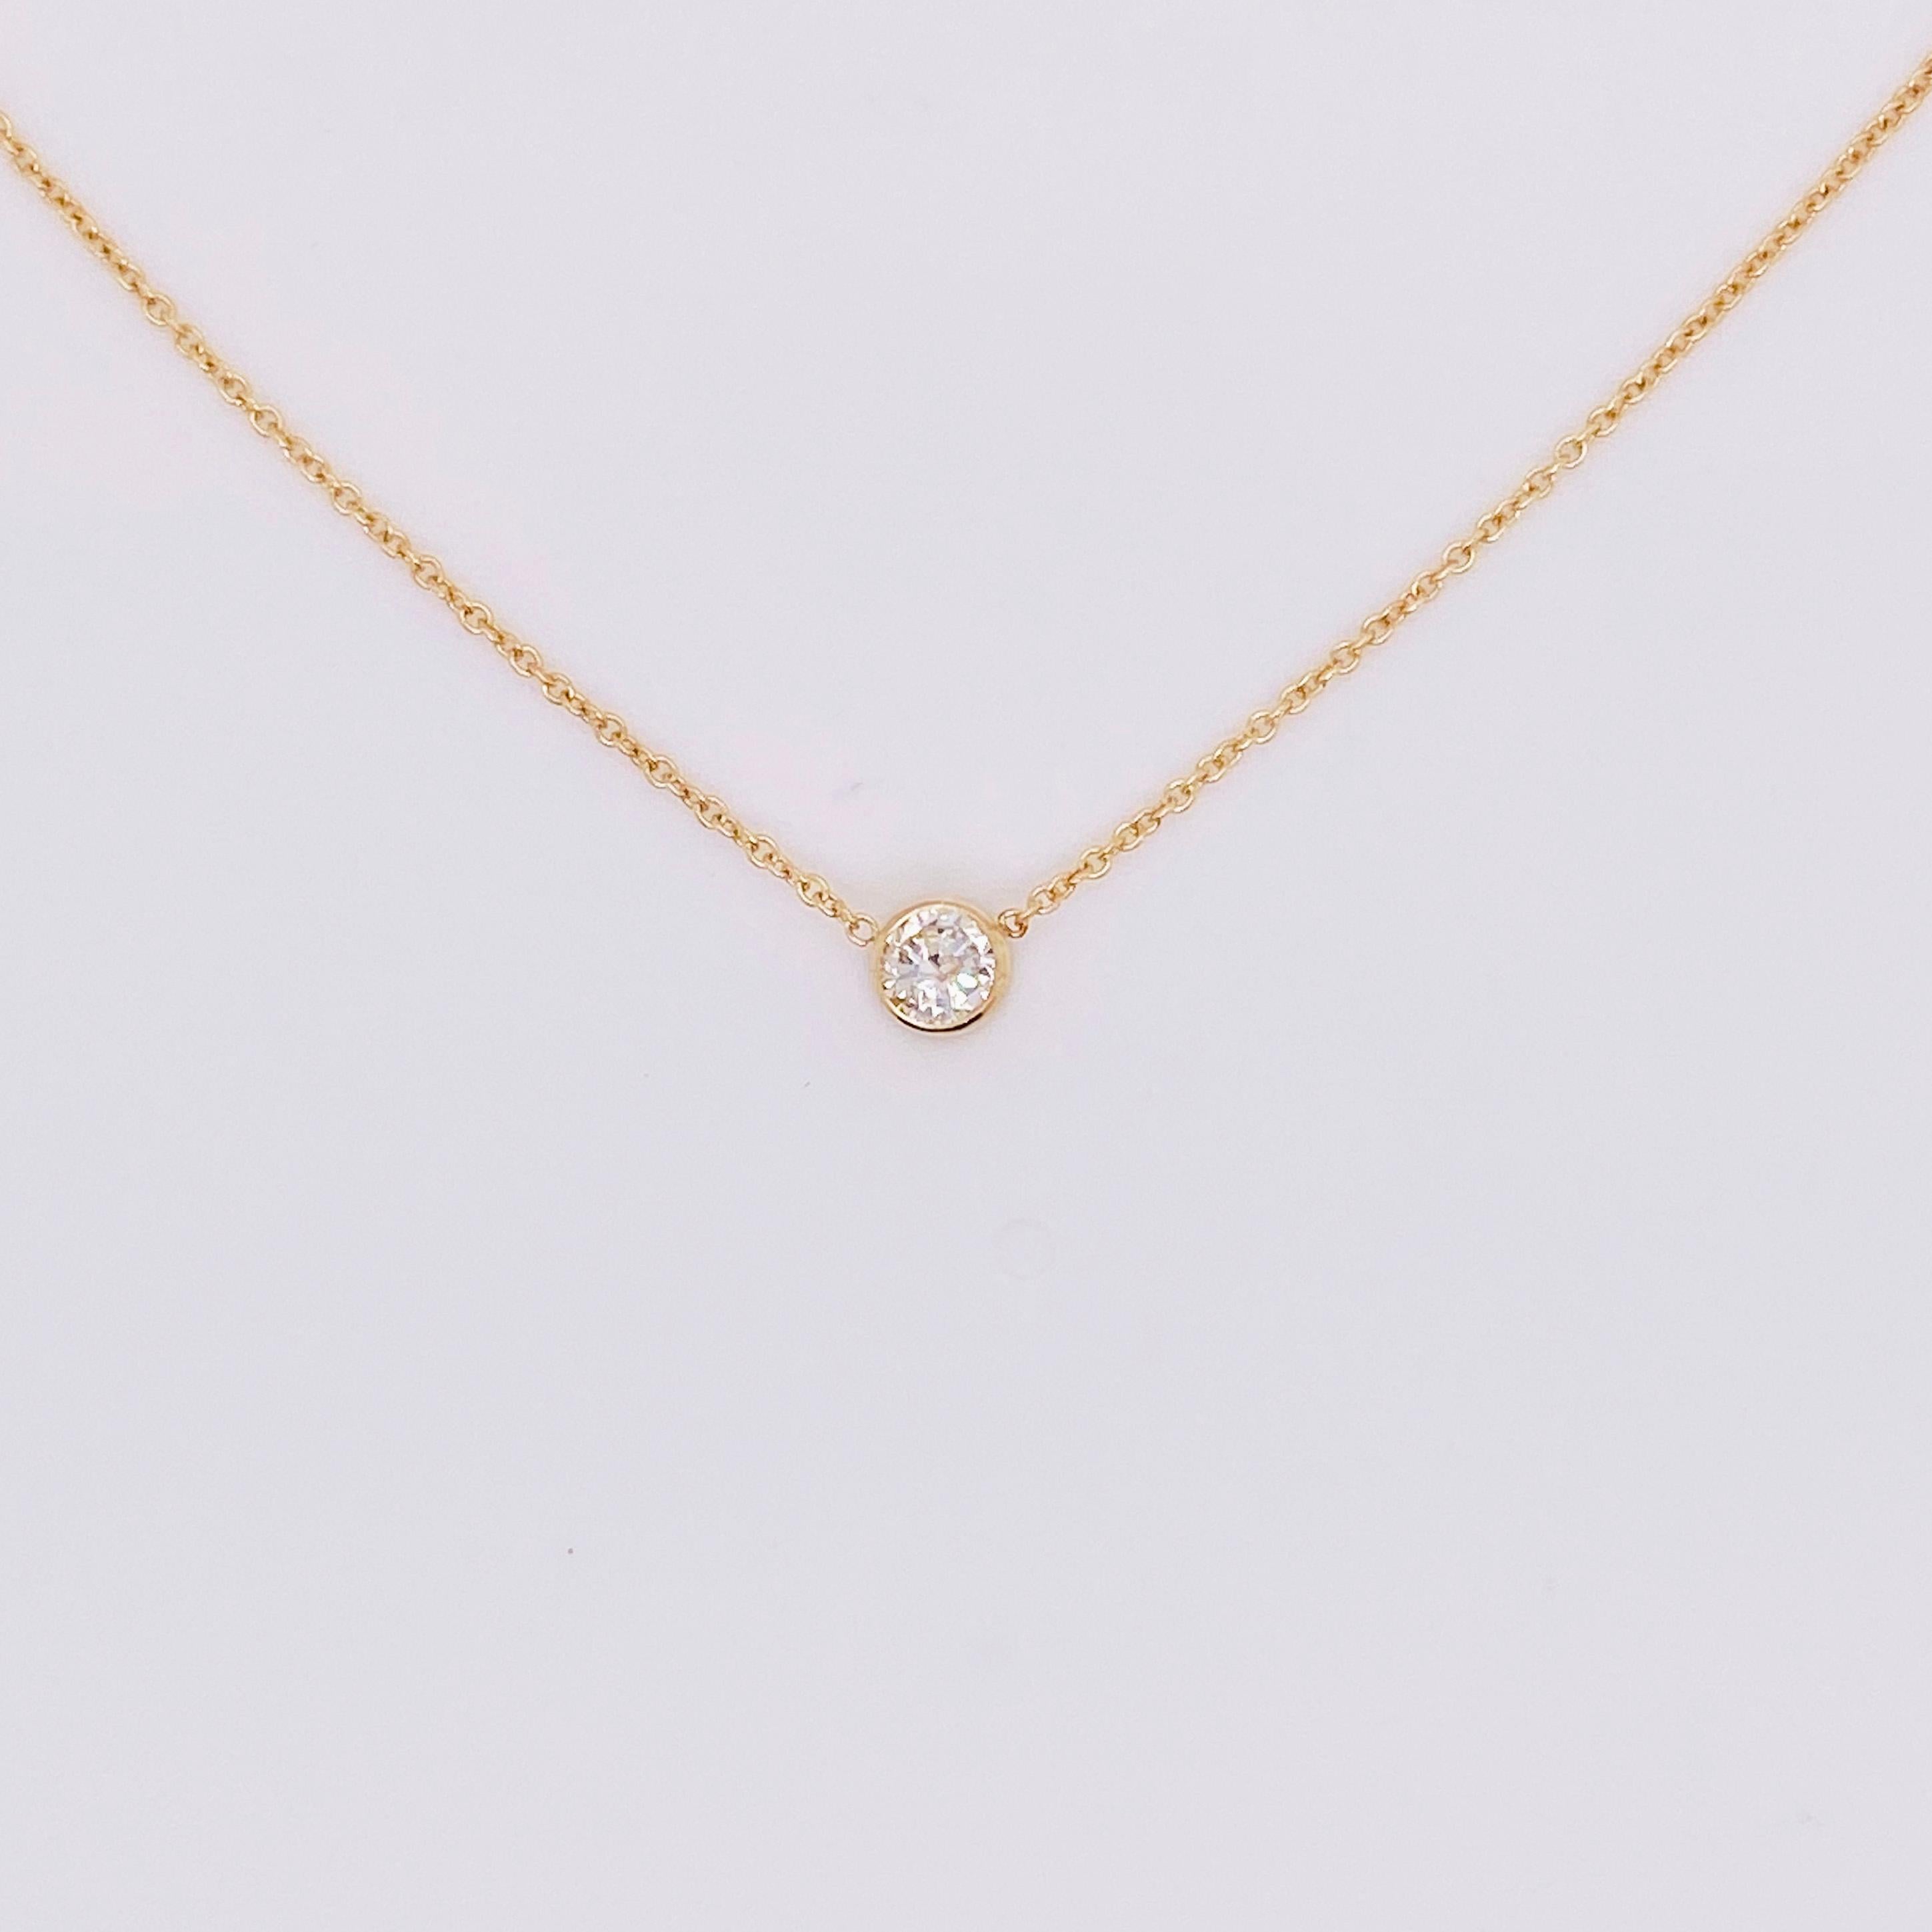 This diamond necklace has a beautiful 1/4 carat diamond set in a stunning 14 karat yellow gold bezel and cable chain. This necklace is a classic design that is perfect on any neck. The elegant cable chain is the perfect design for a bezel set